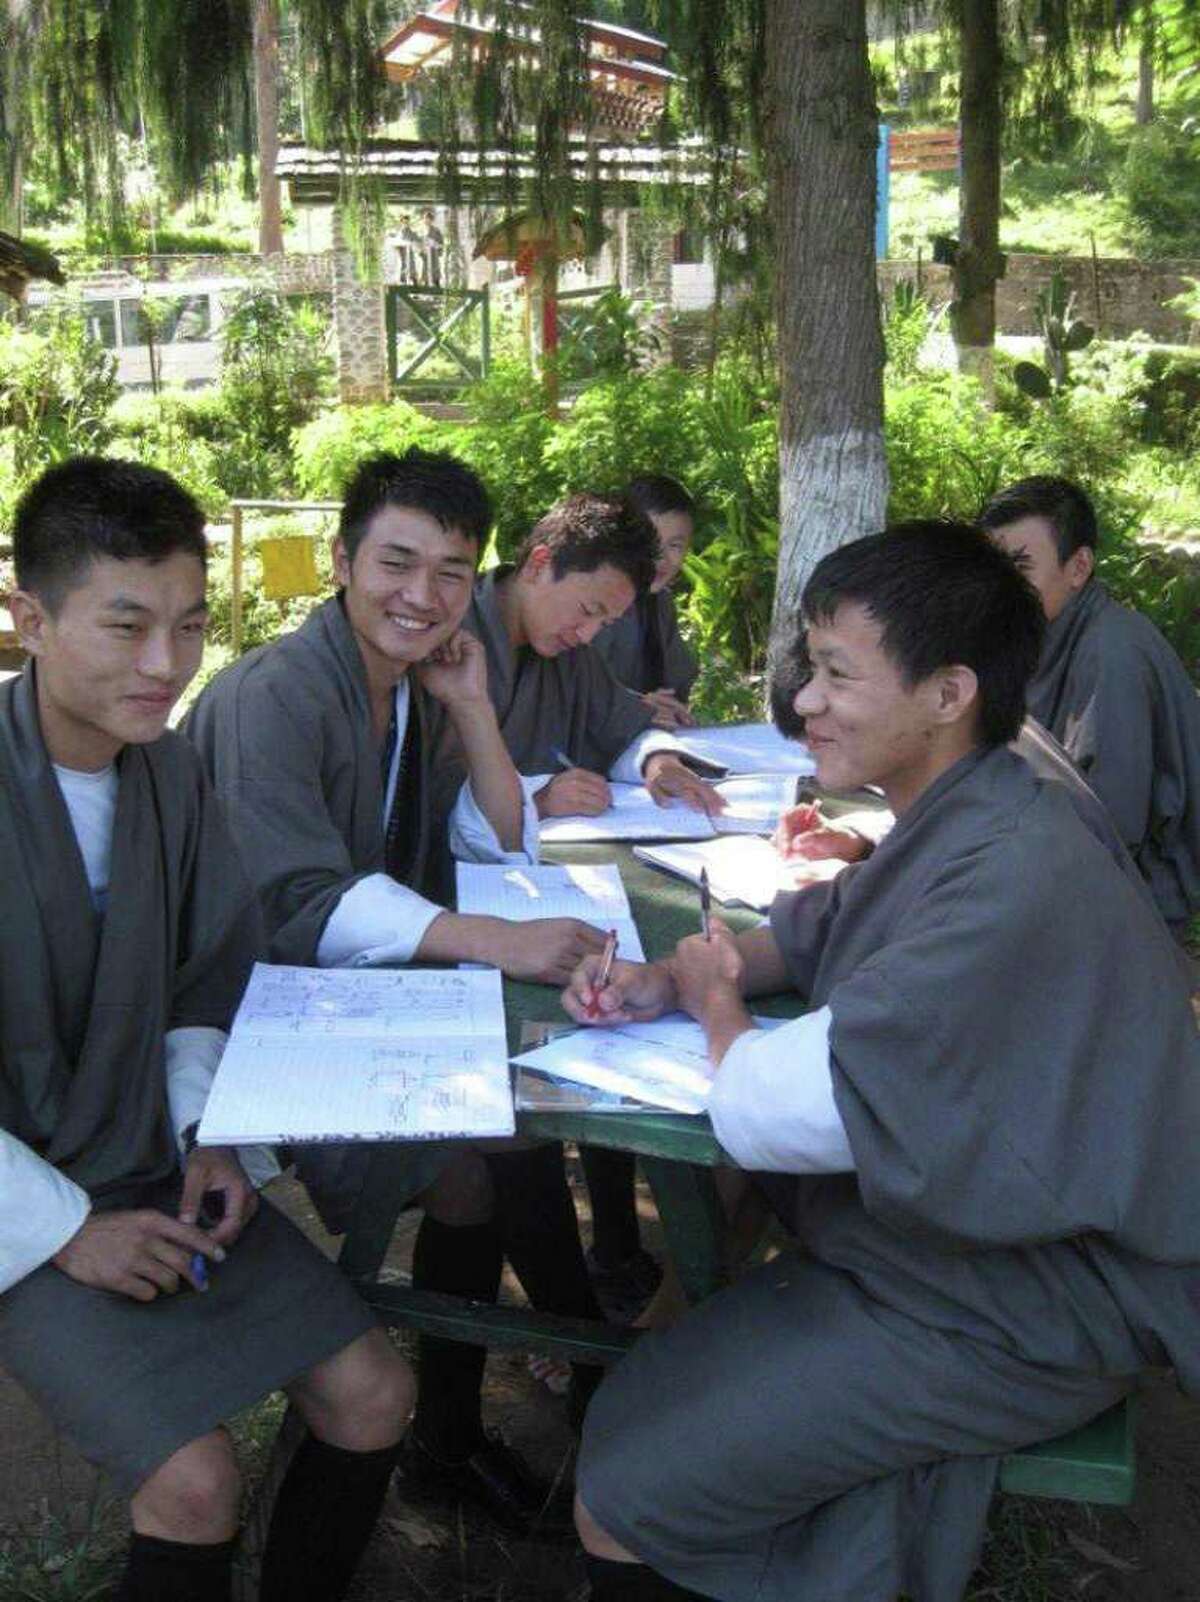 Trav Bhutan 2 Bhutanese high school students are all smiles as they work. Bhutan is said to be the happiest place on earth.